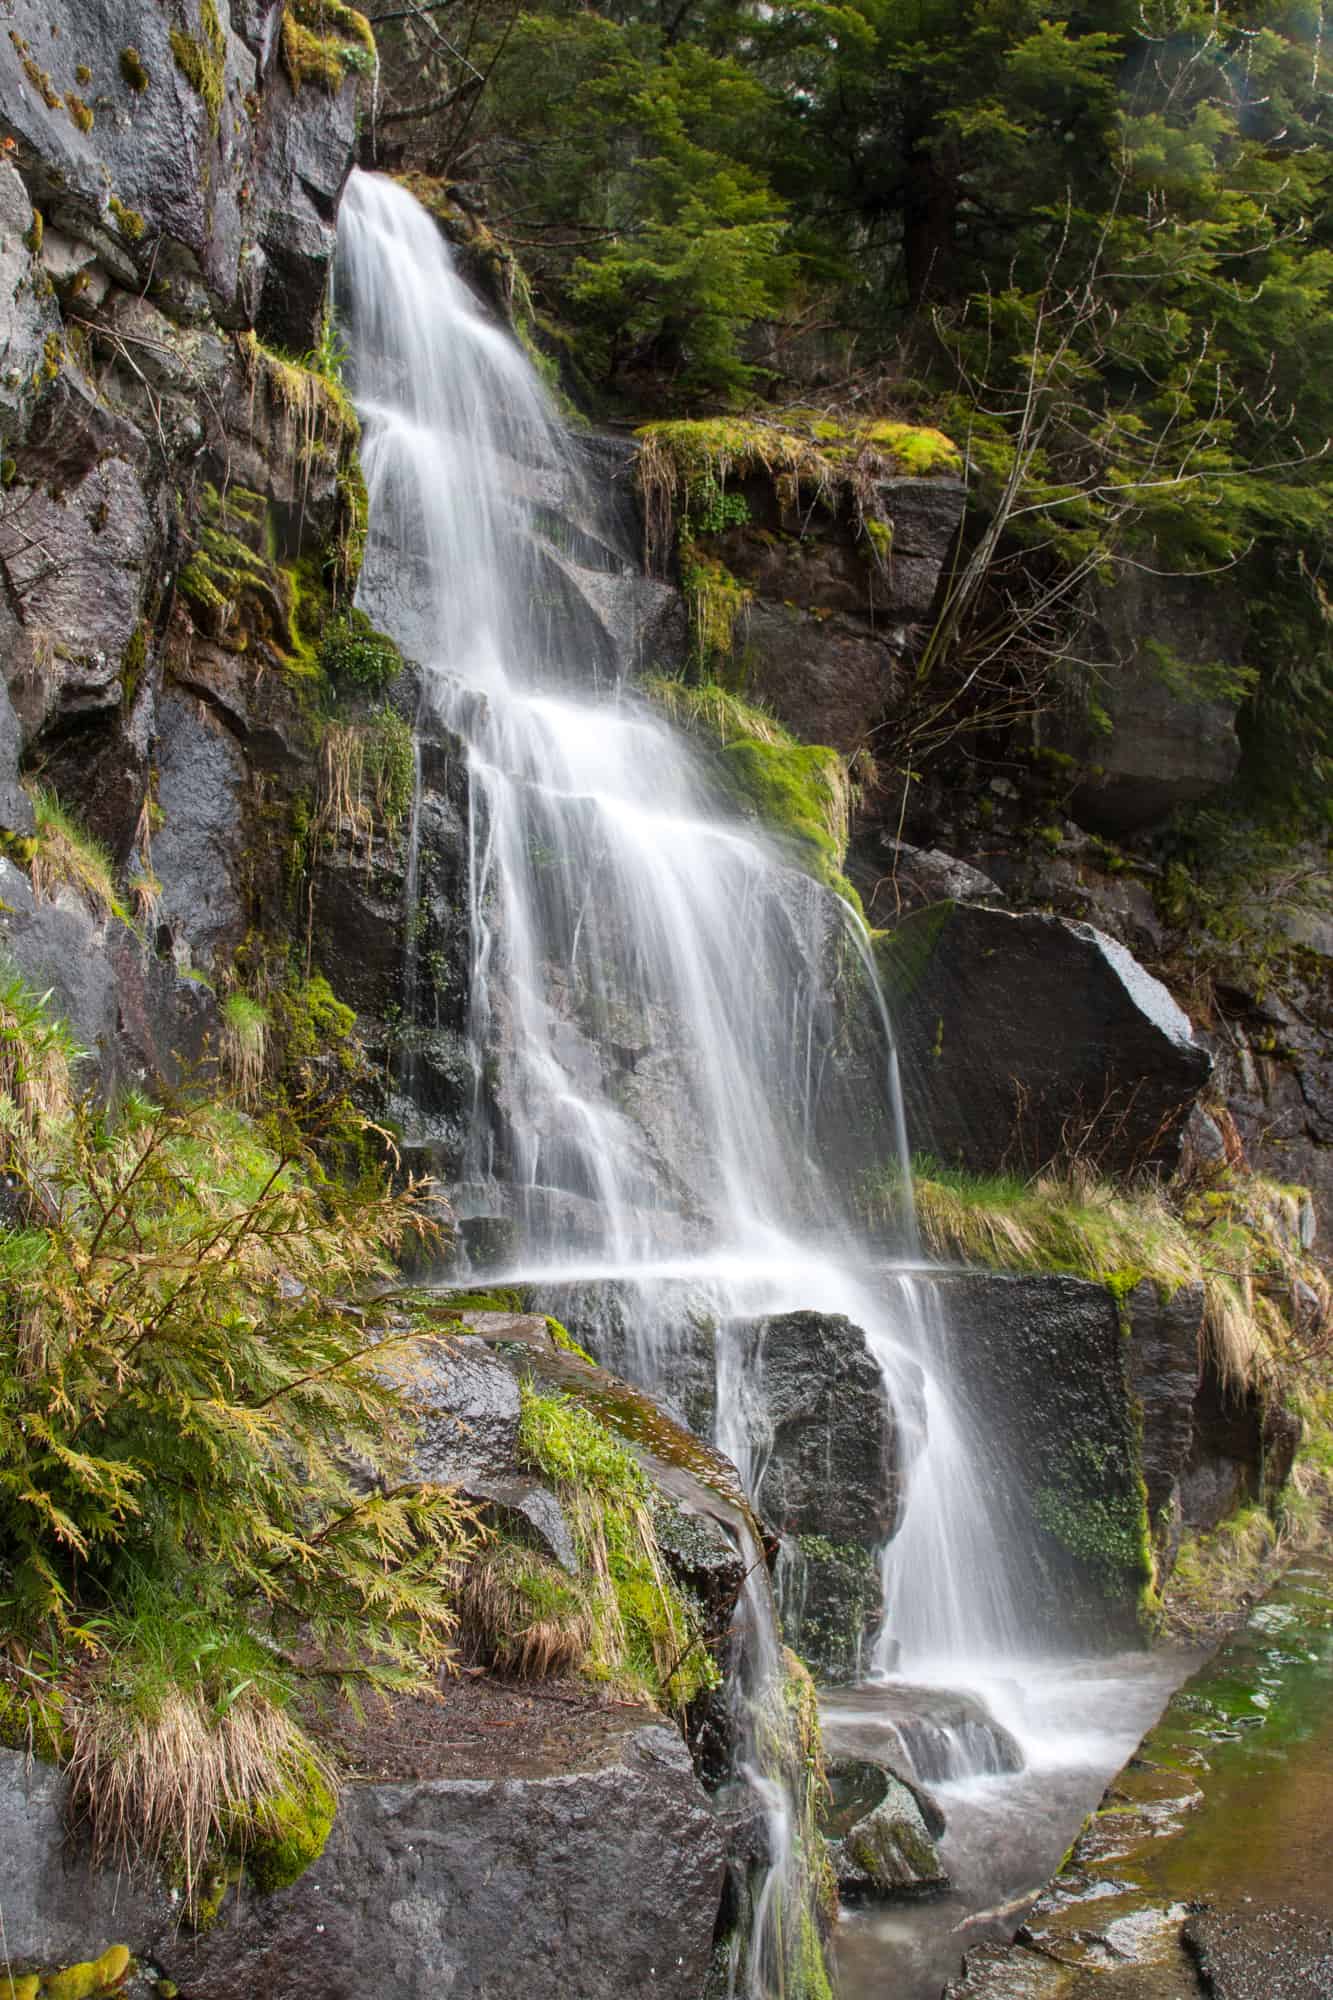 a small waterfall inside mount rainier national park, surrounded by mossy rocks and ferns, mount rainier in spring is the perfect season for waterfalls as the snow melt creates extra flow